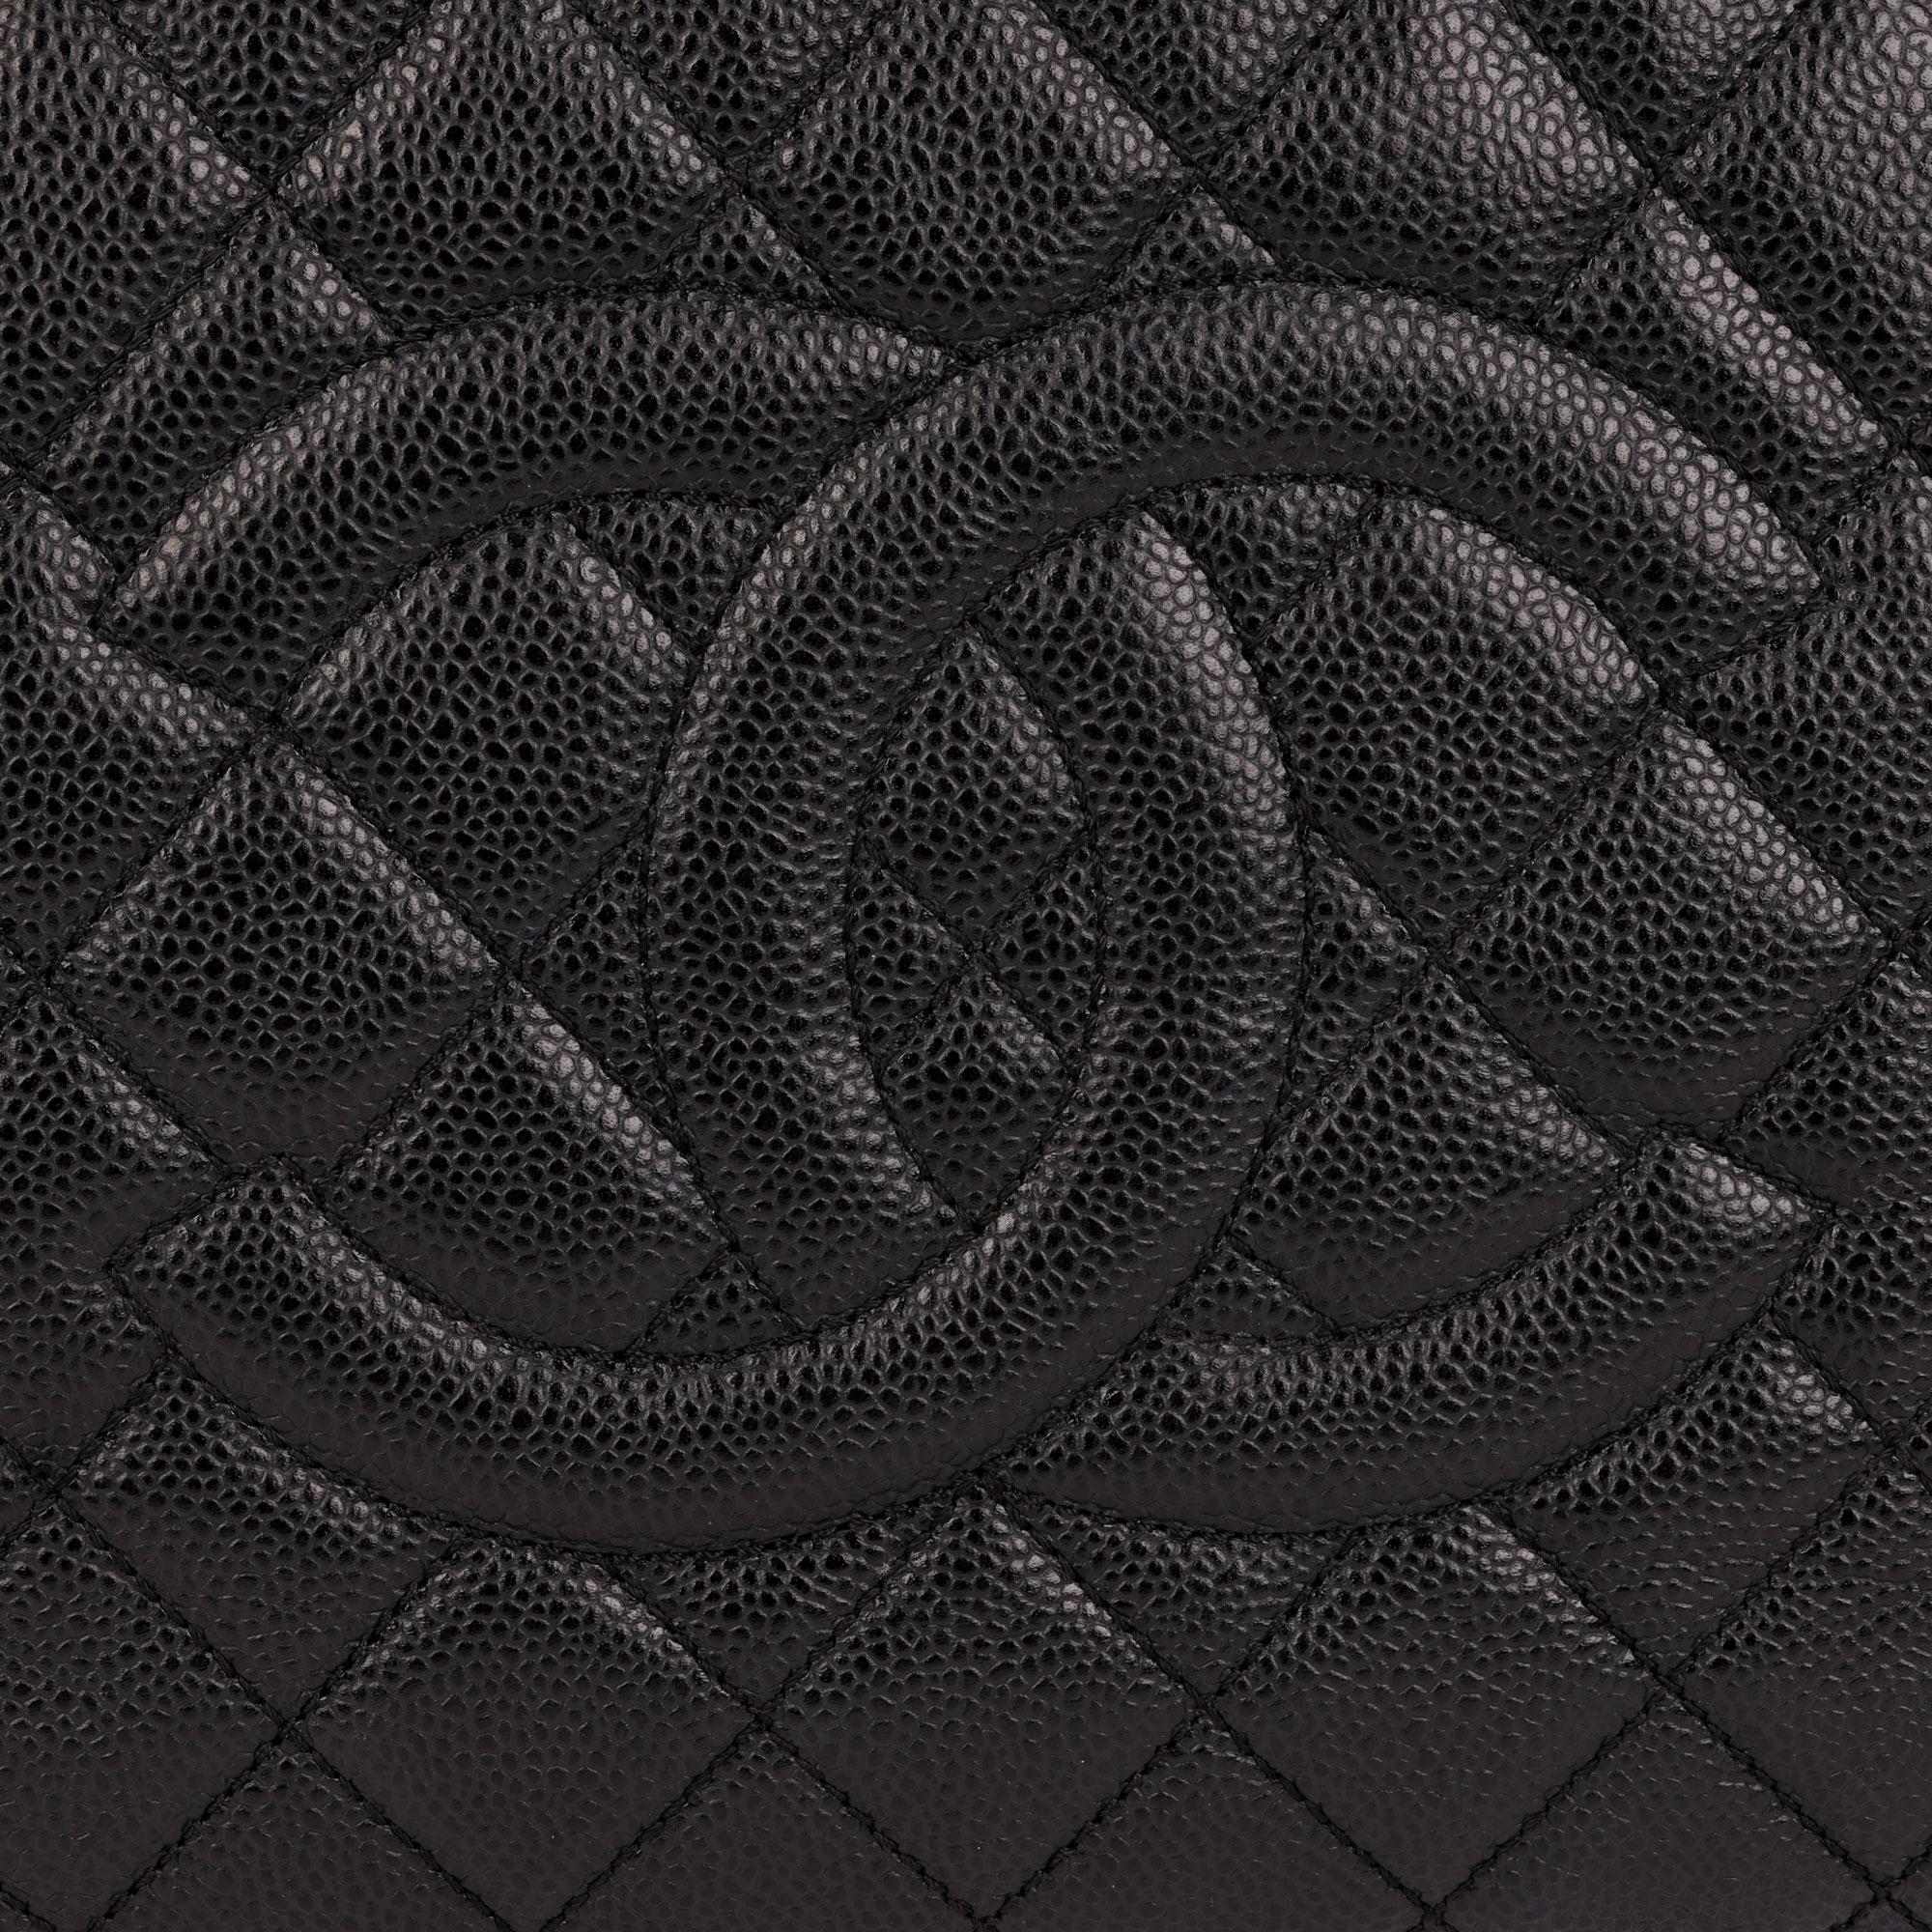 CHANEL
Black Quilted Caviar Leather Grand Shopping Tote GST

Xupes Reference: HB4018
Serial Number: 16687406
Age (Circa): 2012 
Accompanied By: Authenticity Card
Authenticity Details: Authenticity Card, Serial Sticker (Made in Italy)
Gender: